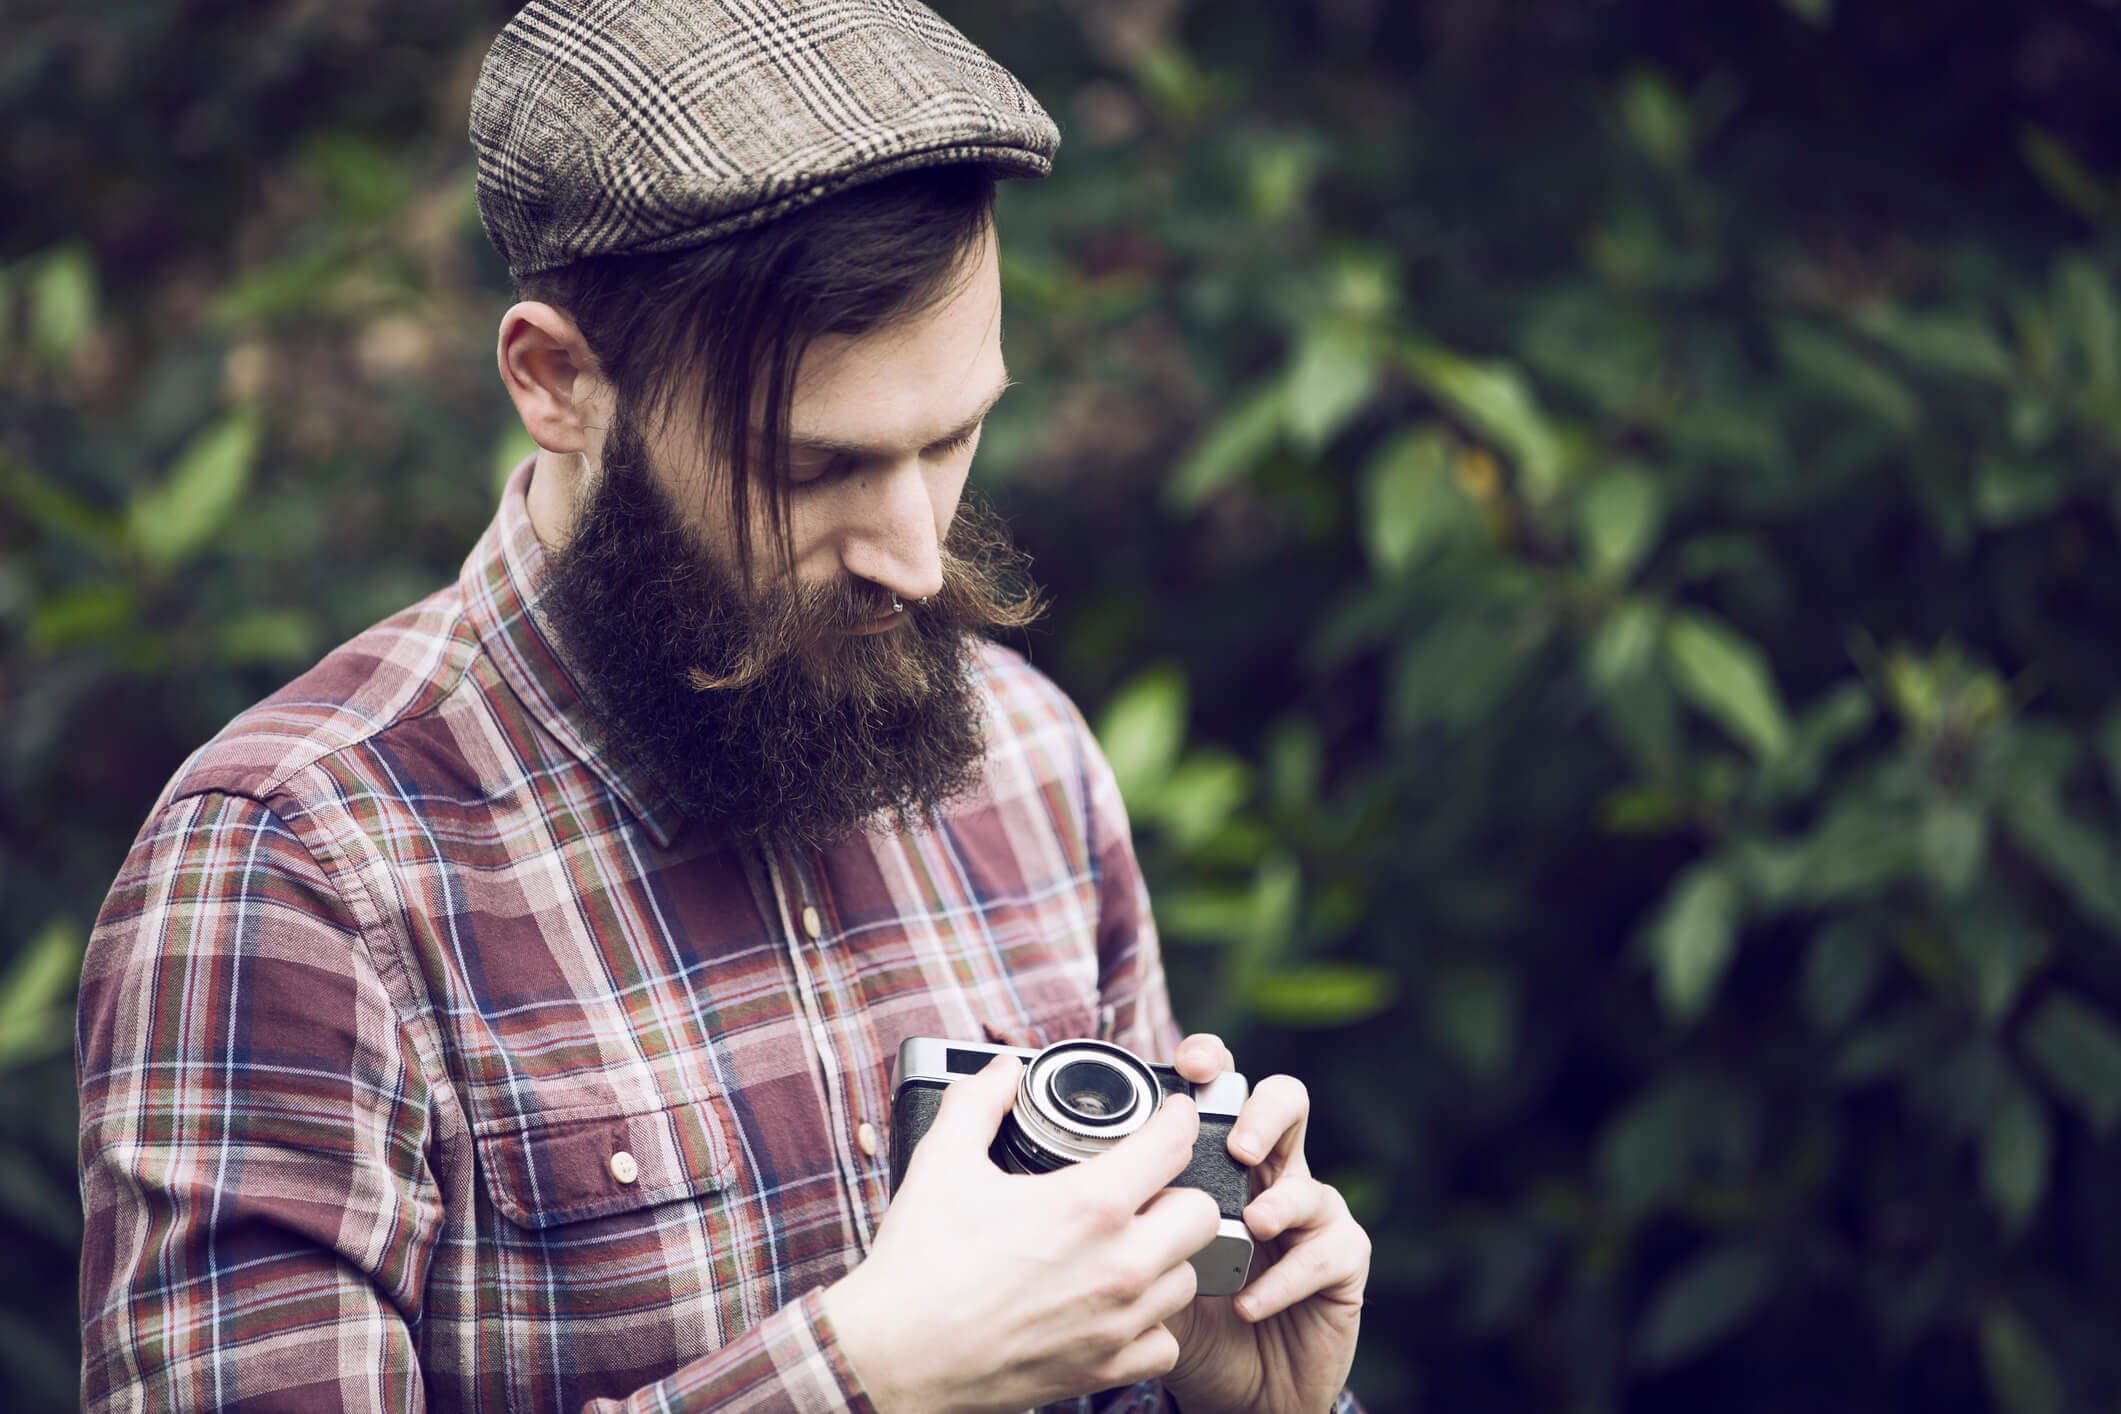 For Merlin’s beard! Introducing the best gadgets for bearded men